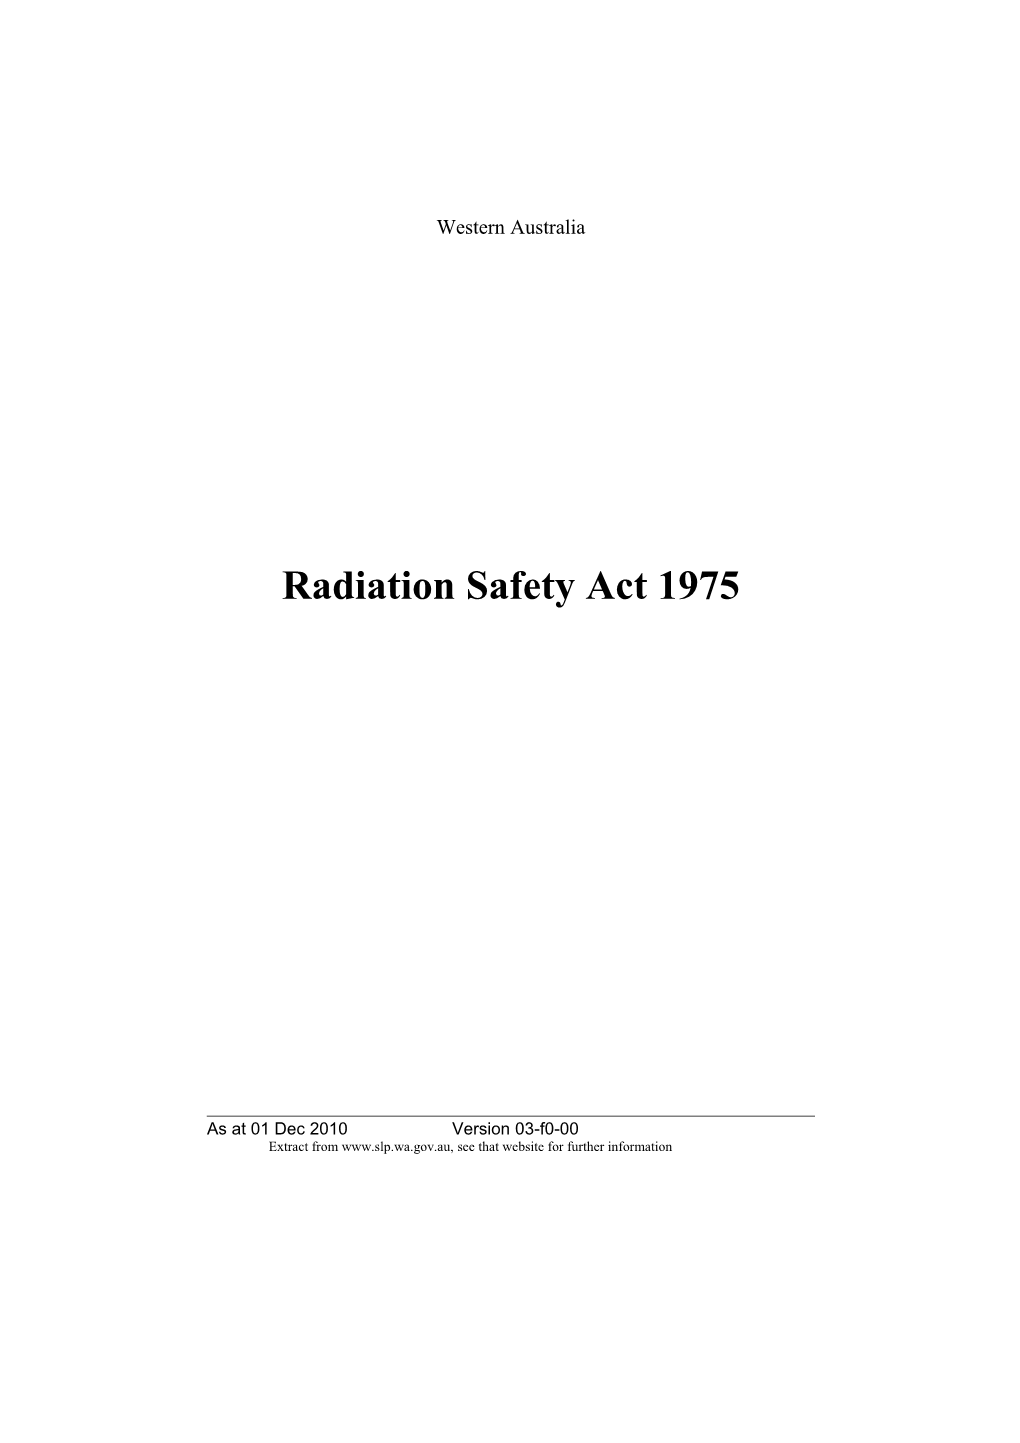 Radiation Safety Act 1975 - 03-F0-00